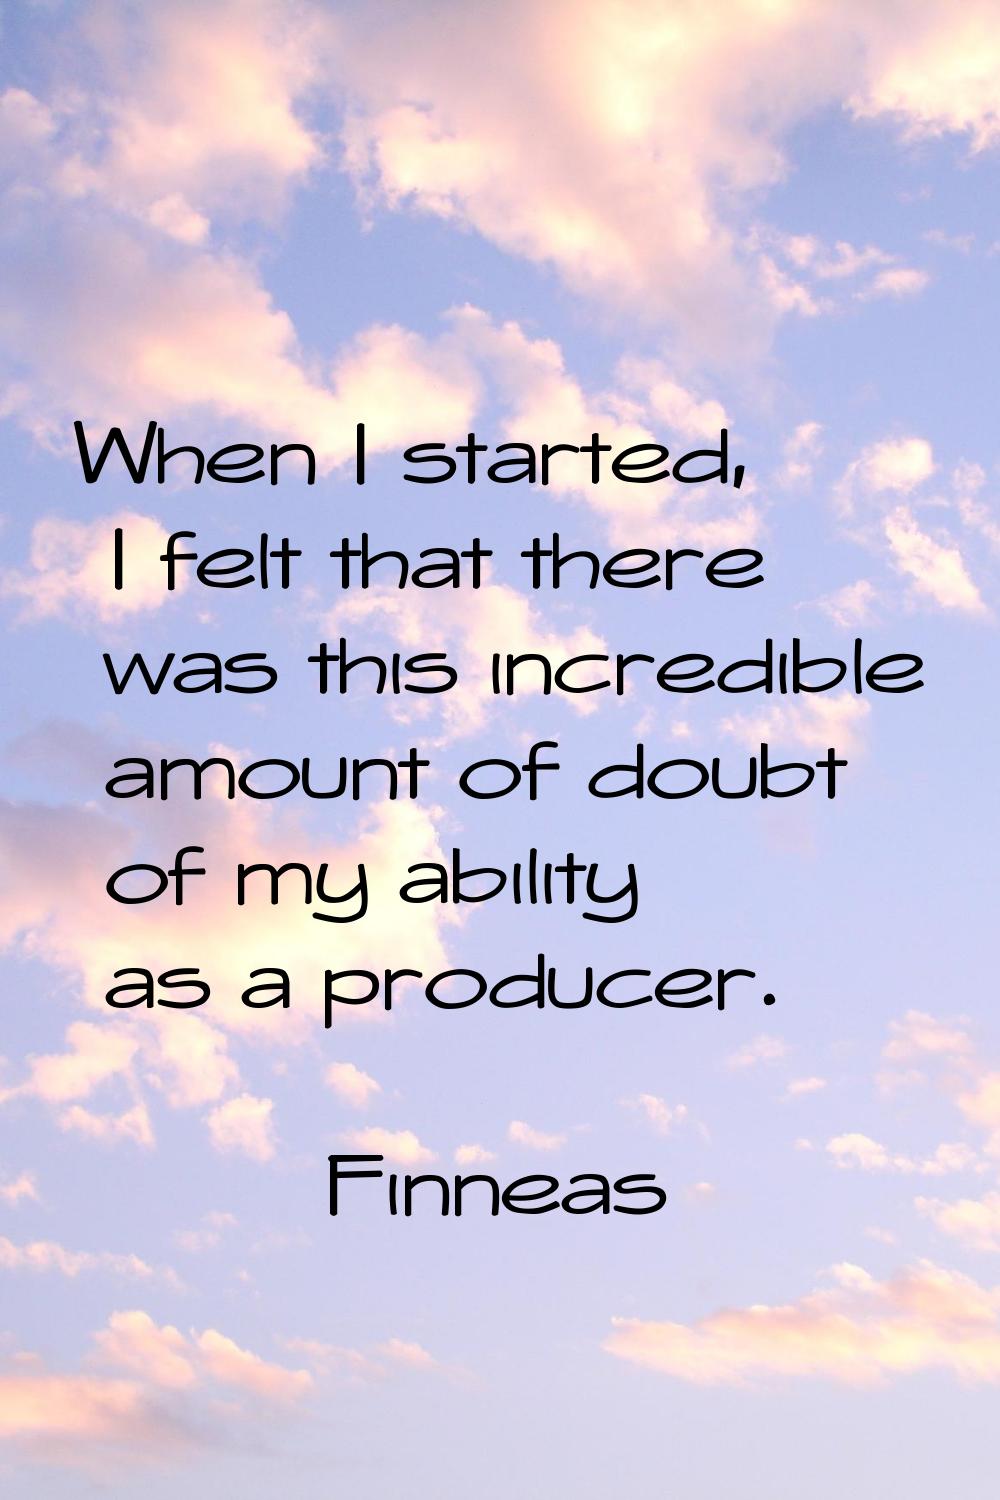 When I started, I felt that there was this incredible amount of doubt of my ability as a producer.